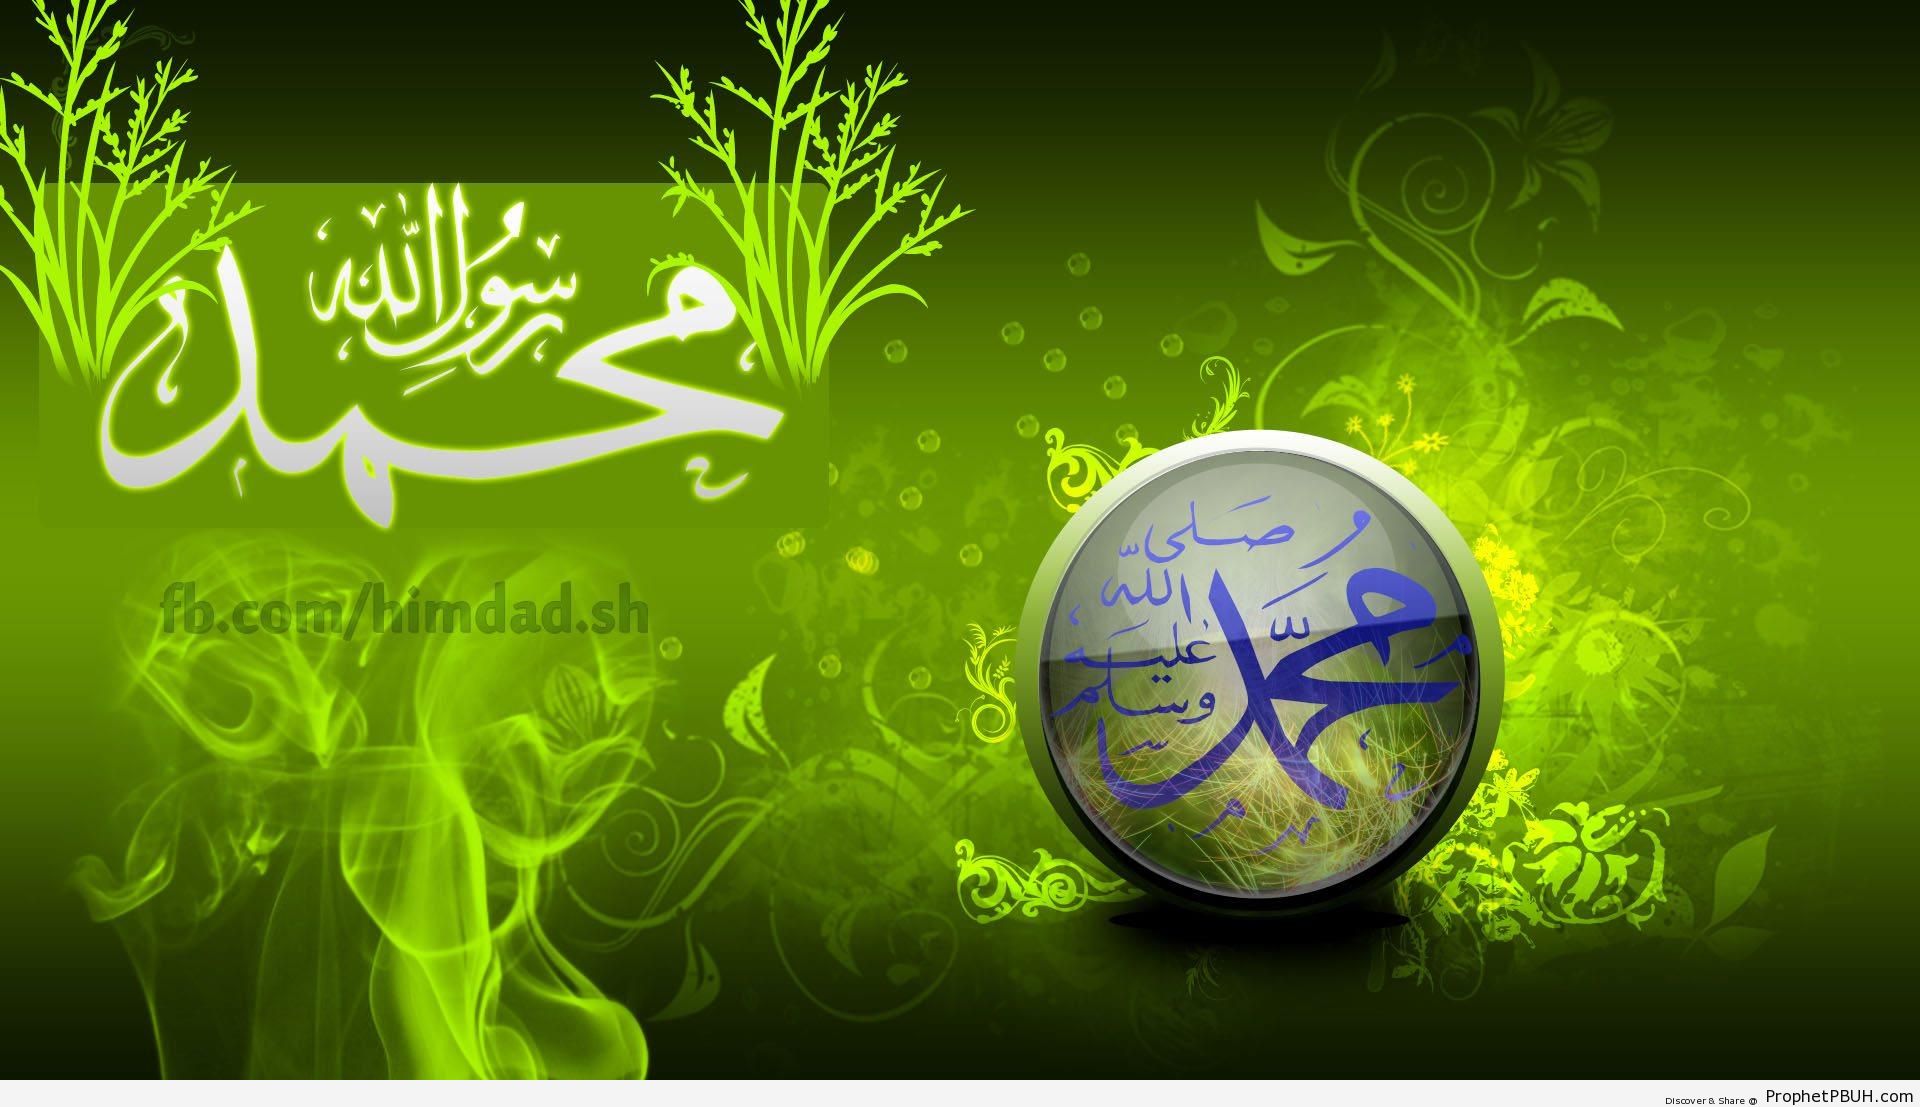 HD Wallpaper (1920 x 1080) with Prophet Muhammad-s Name ï·º - Islamic Calligraphy and Typography 